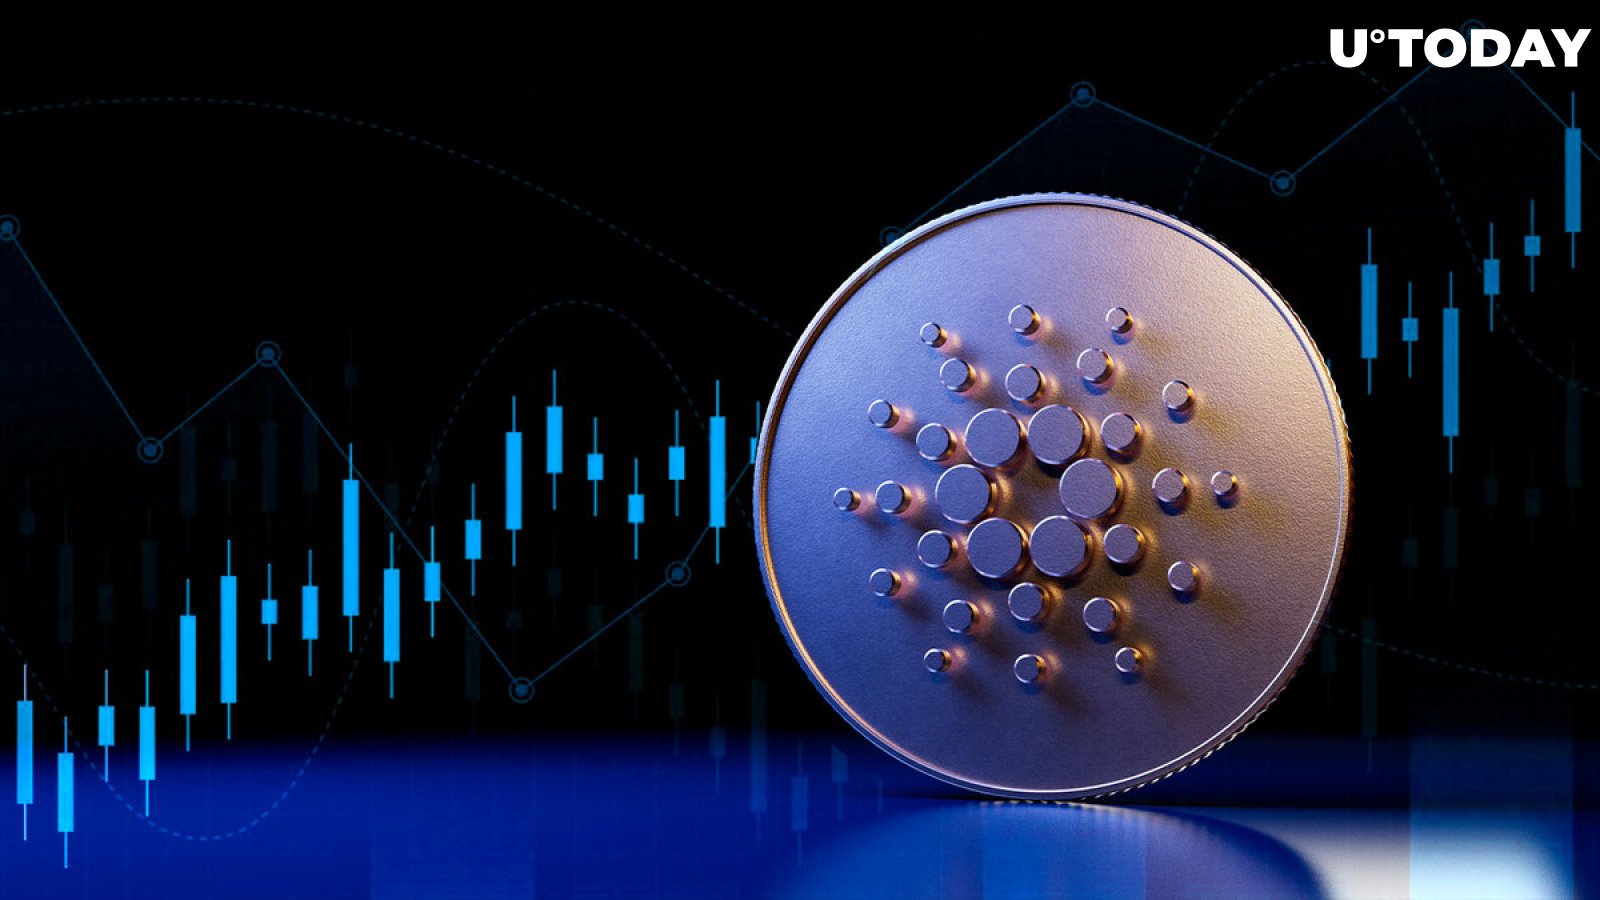 Cardano Sees 90% Daily Increase in Active Addresses, Here's How It Affects Price